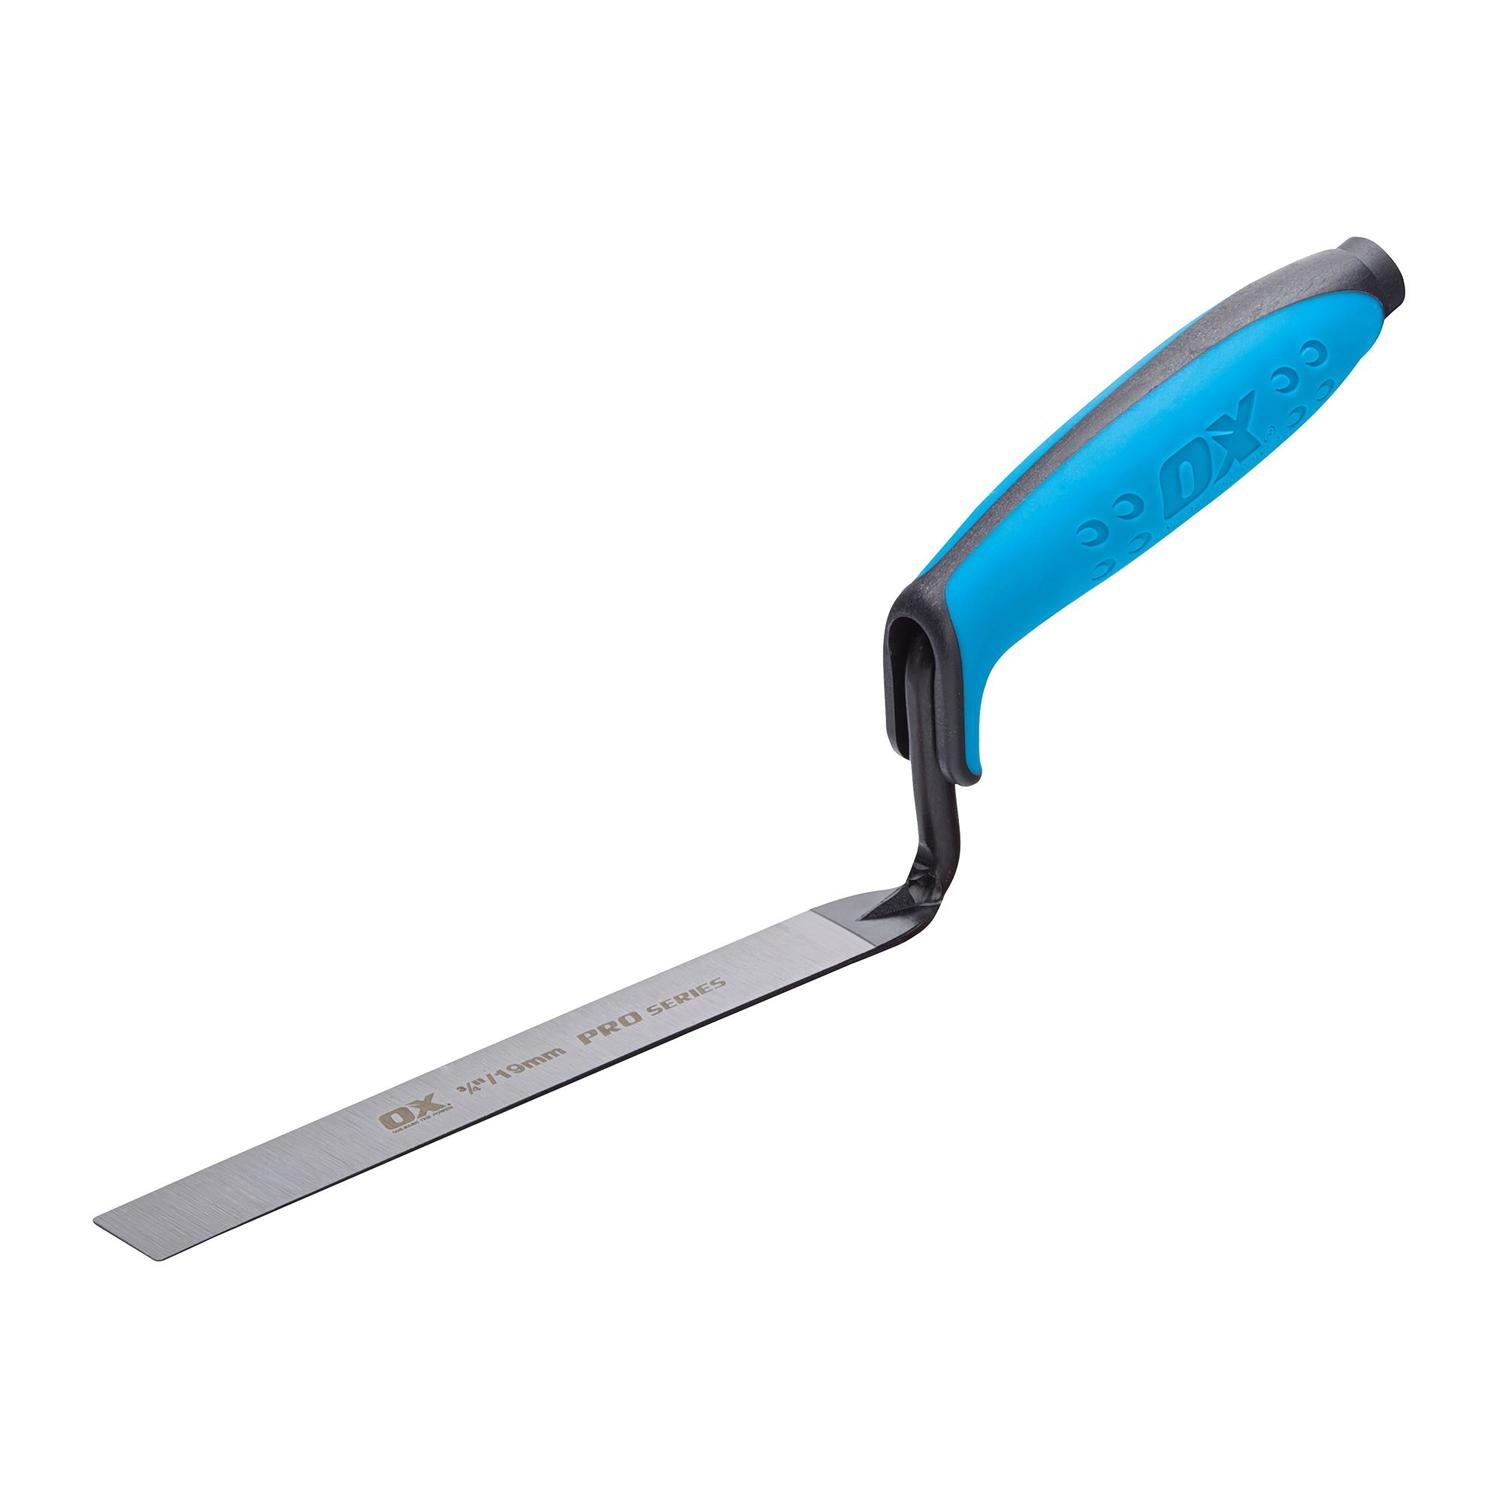 Ox Professional Professional Mortar Smoothing Tool 10mm Blue